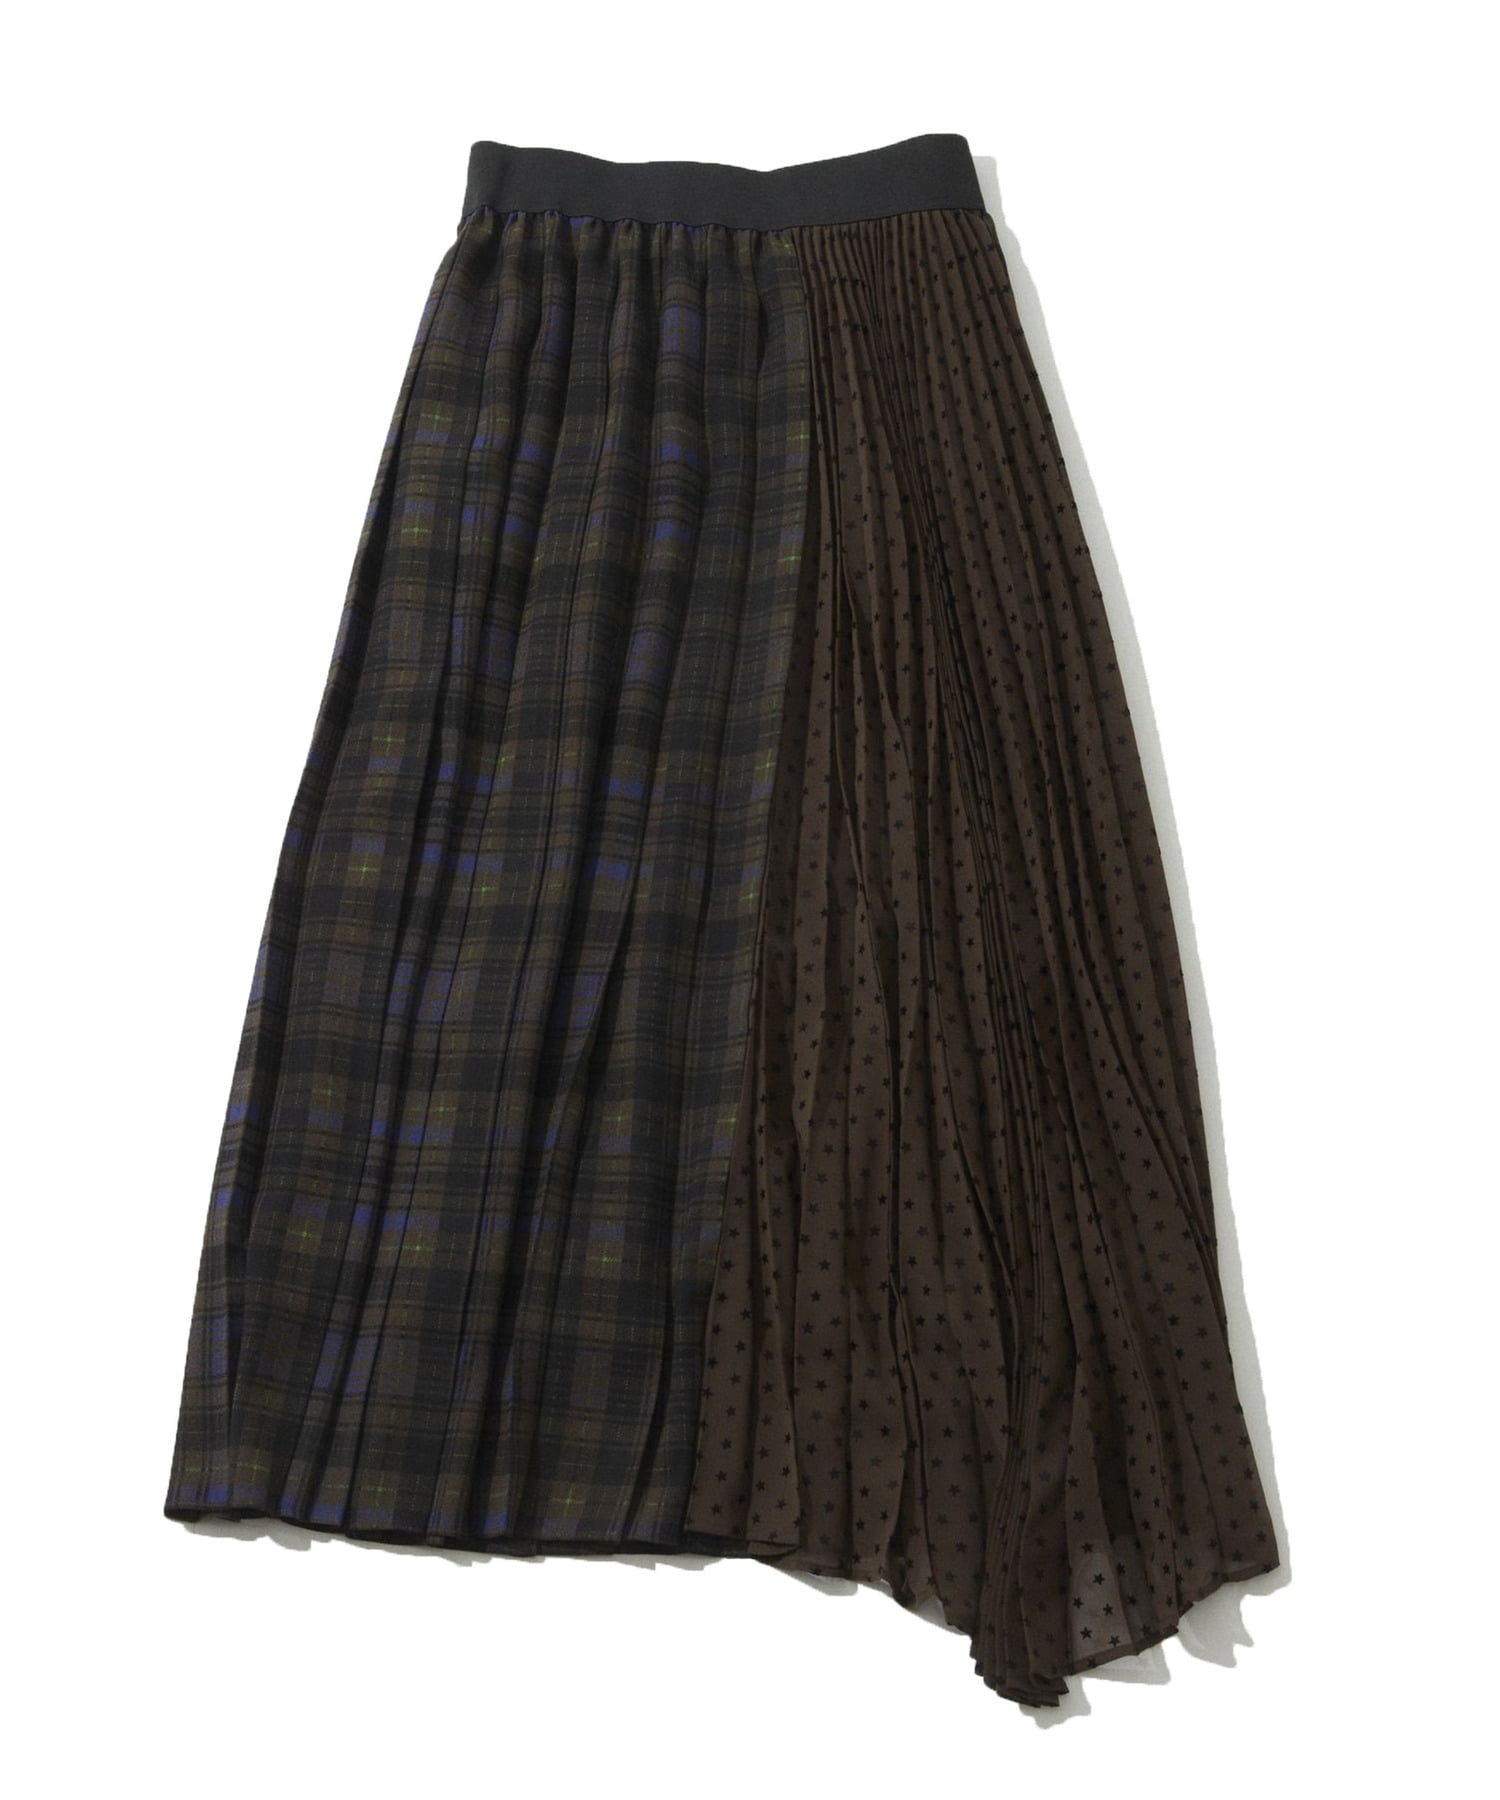 【CONVERSE TOKYO × CLANE】CHECKED PLEATED SKIRT